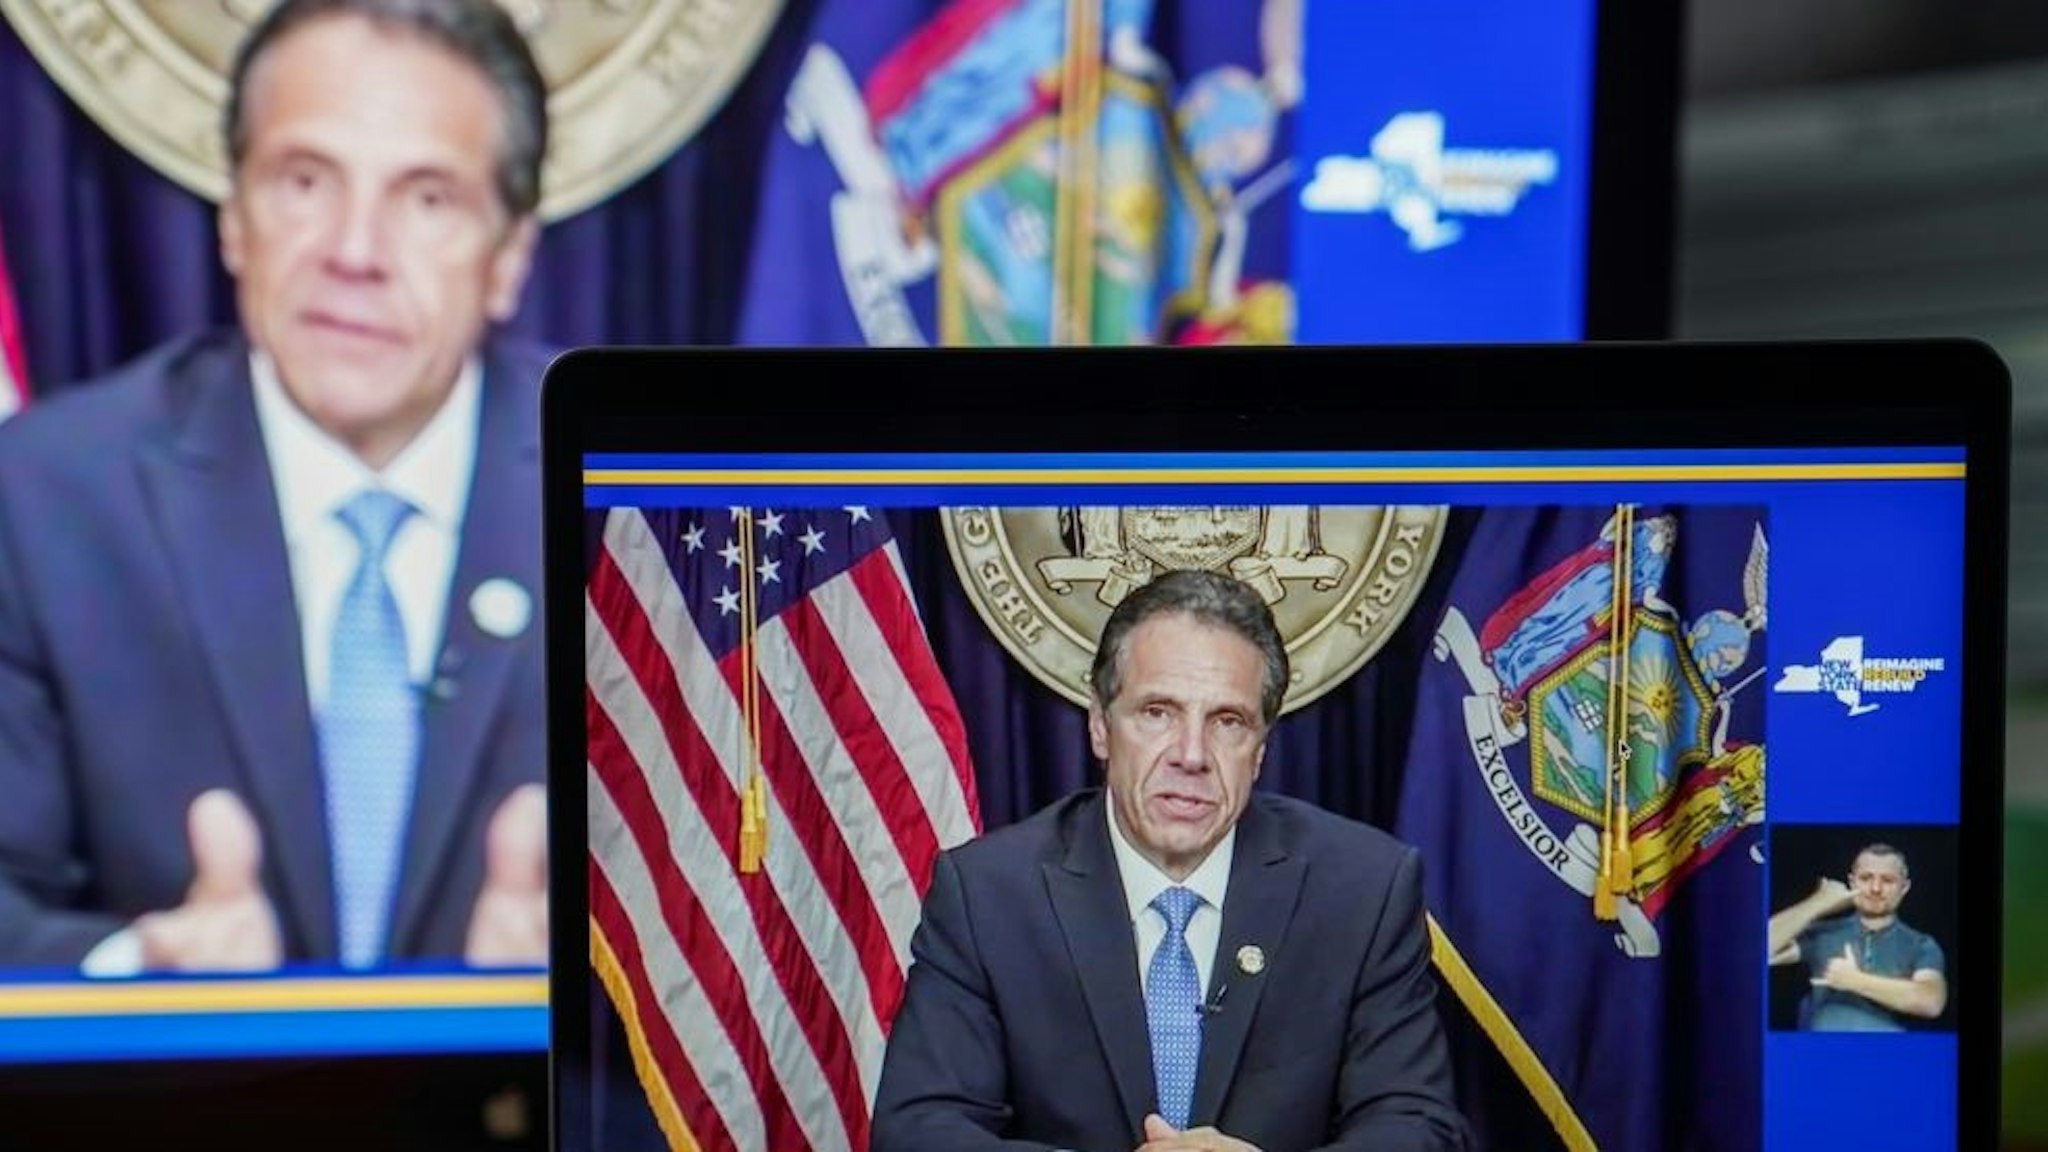 Photo taken from a video in New York, the United States, shows New York Governor Andrew Cuomo speaking during a televised address, on Aug. 10, 2021. New York Governor Andrew Cuomo on Tuesday said he was resigning amid mounting pressures from sexual harassment allegations and investigations as well as calls from other political figures. (Photo by